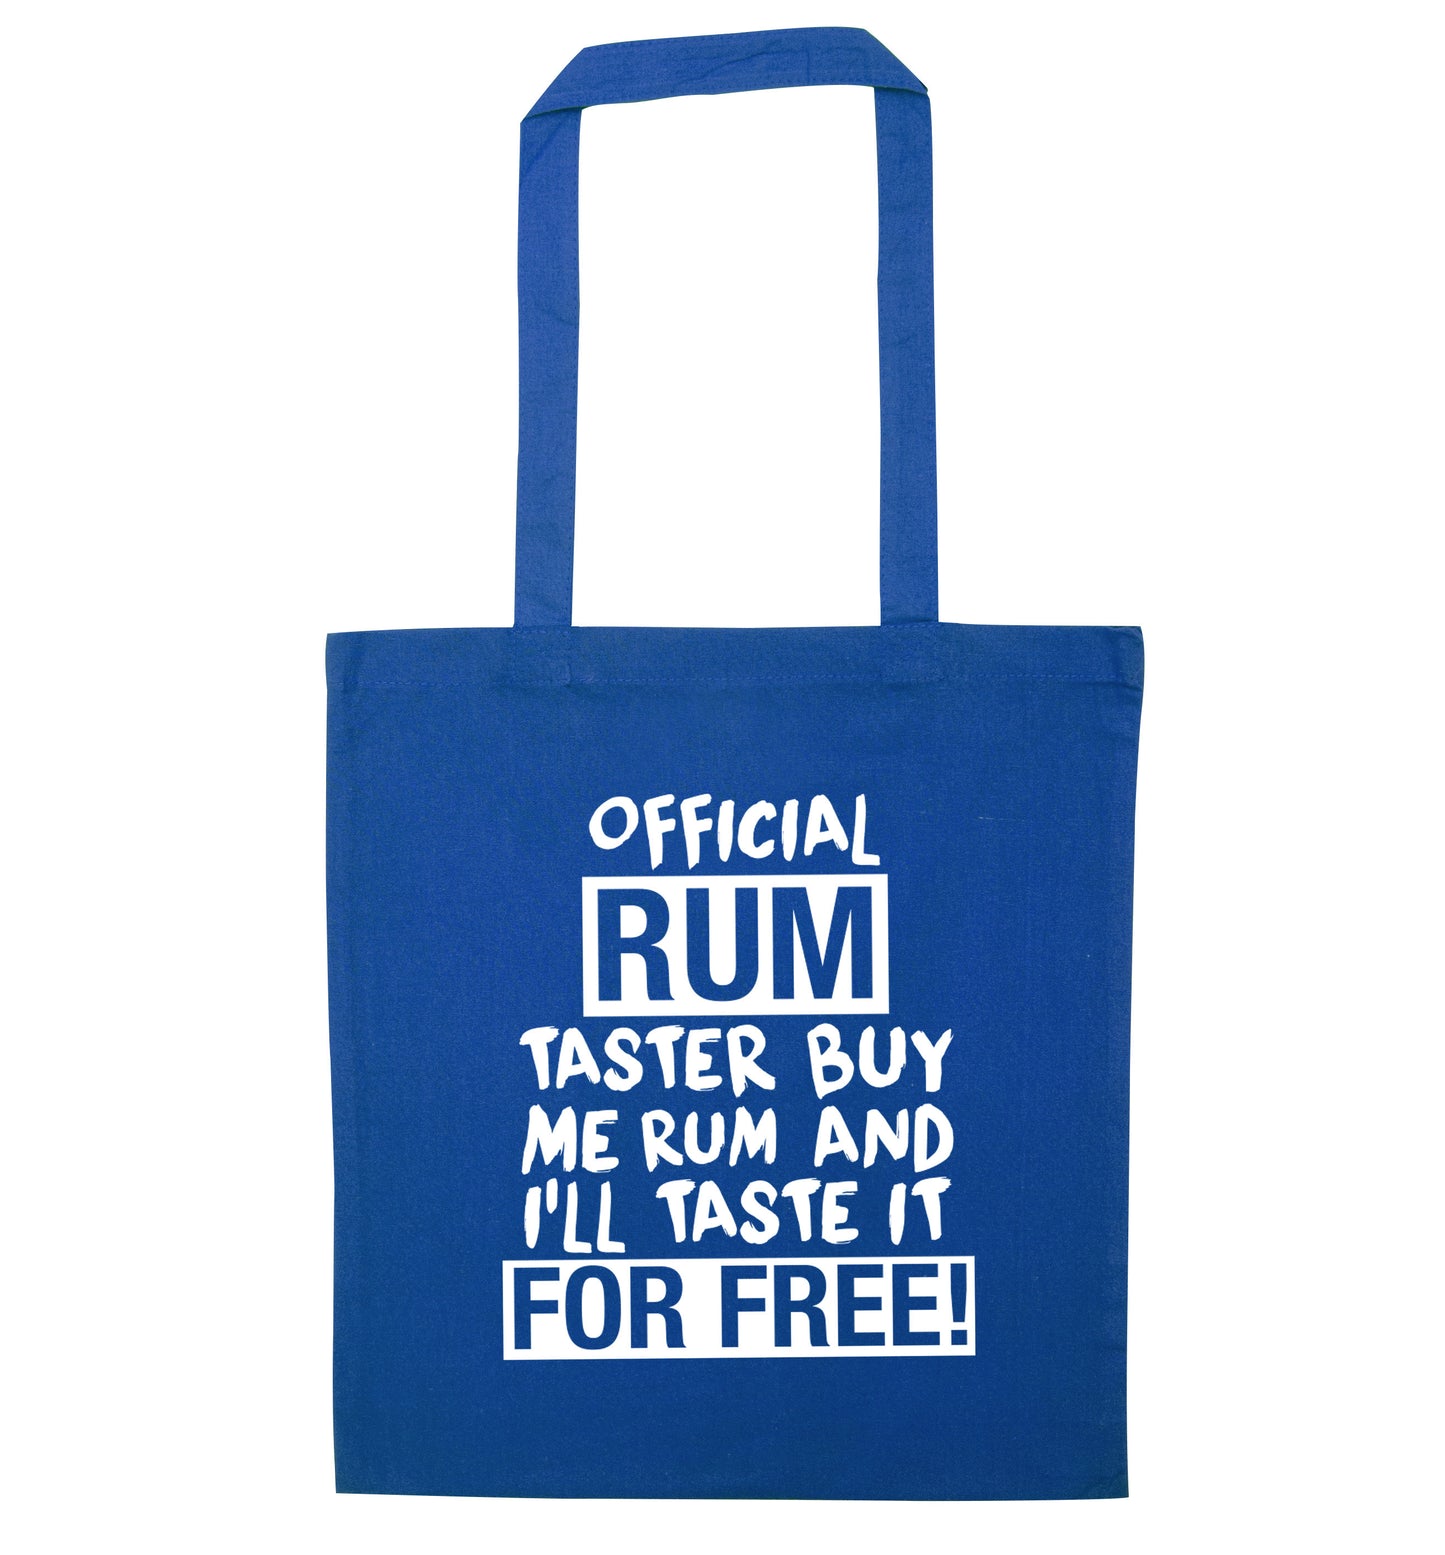 Official rum taster buy me rum and I'll taste it for free blue tote bag